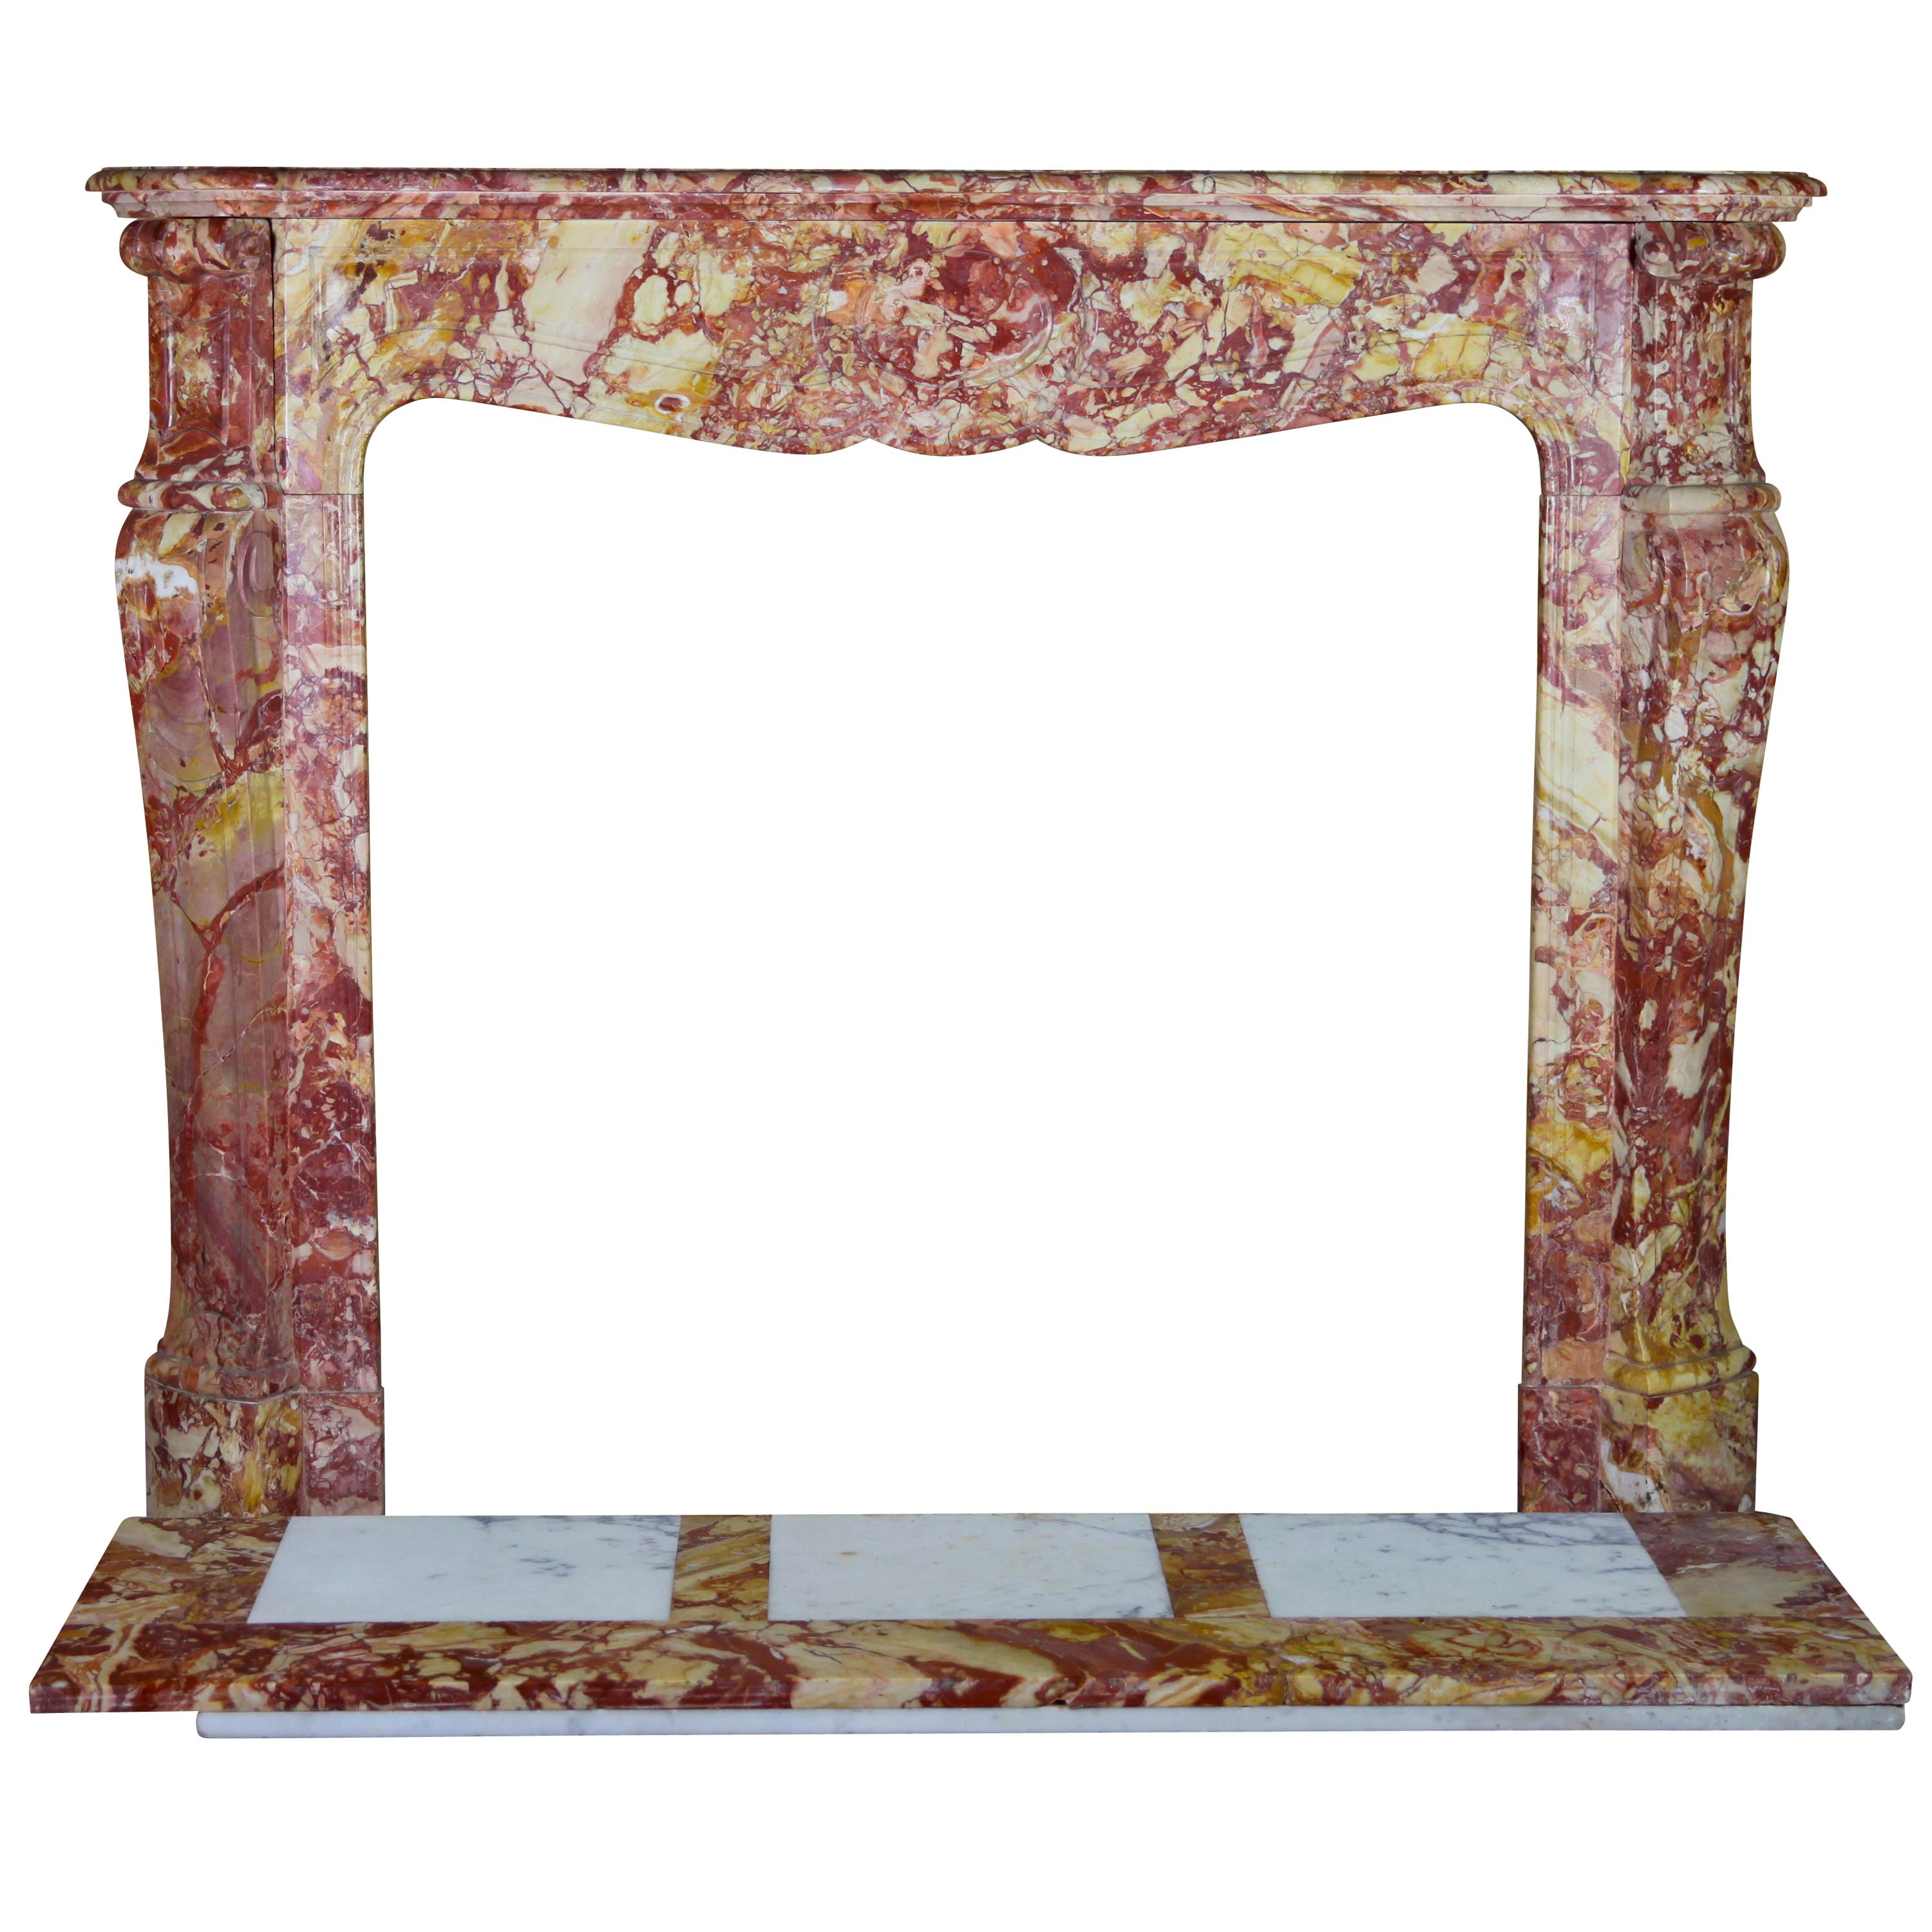 19th Century French Classic Marble Antique Fireplace in the Style of Pompadour